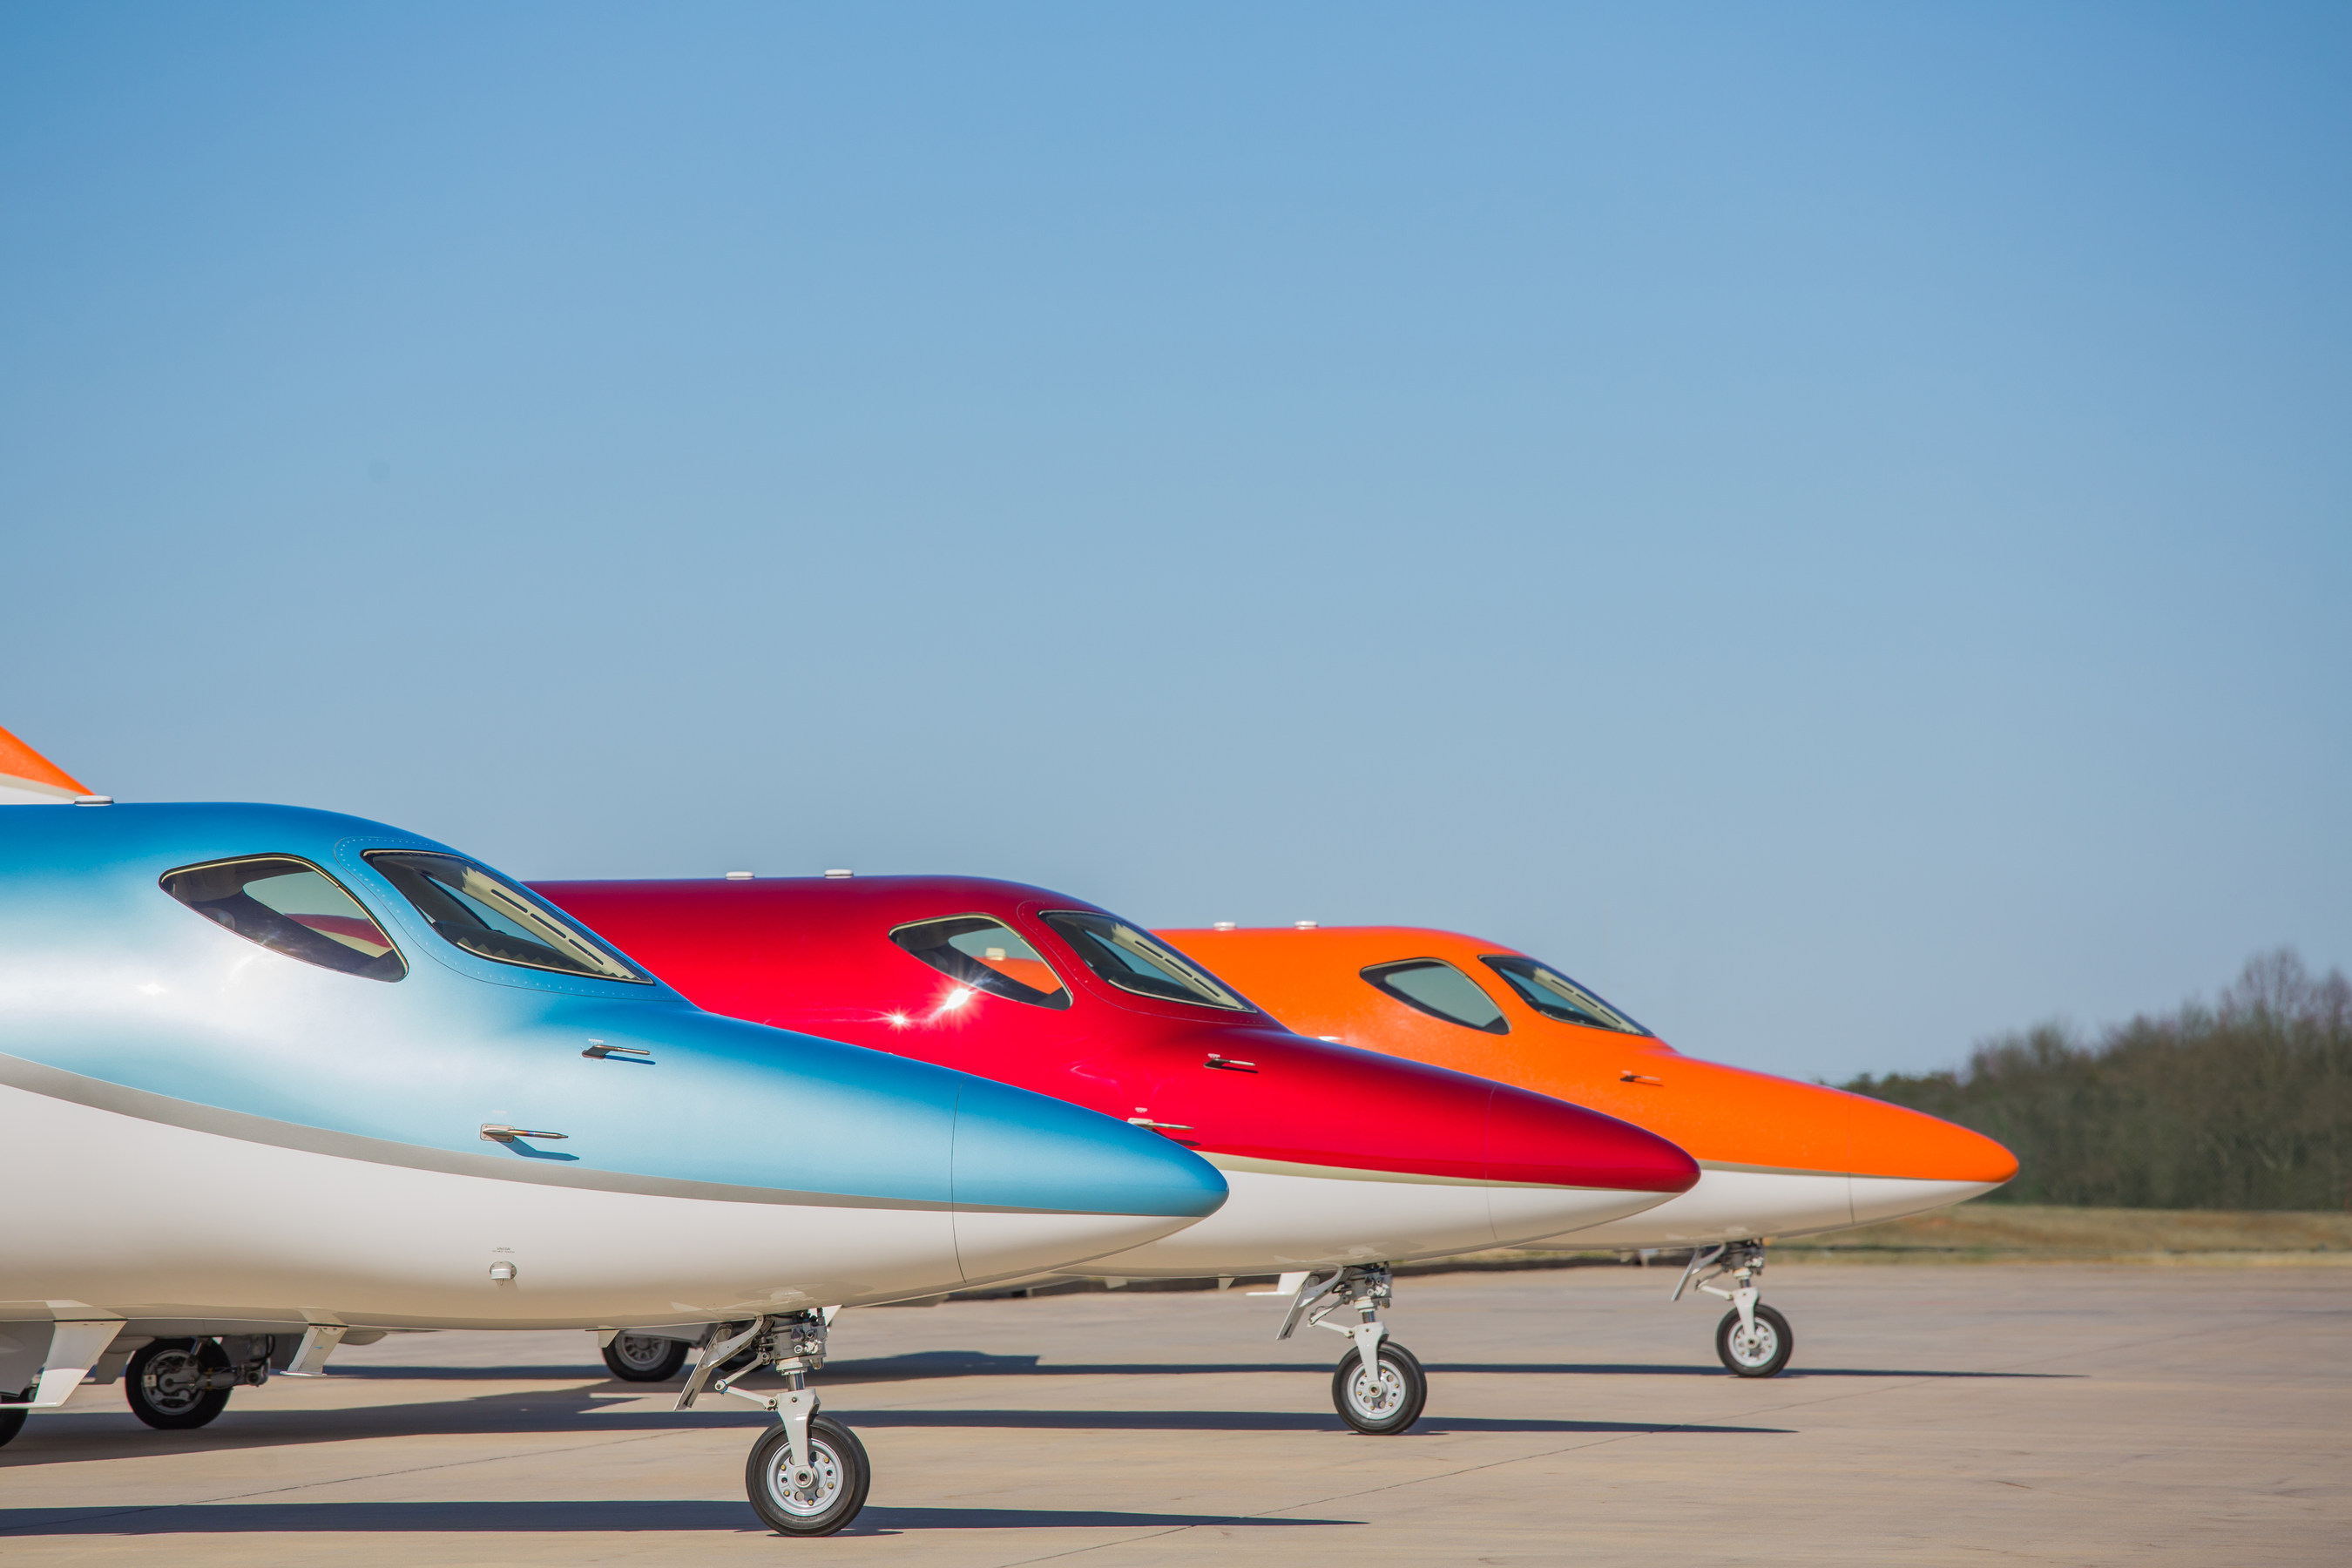 Hondajet Is The Most Delivered Very Light Business Jet In 2019